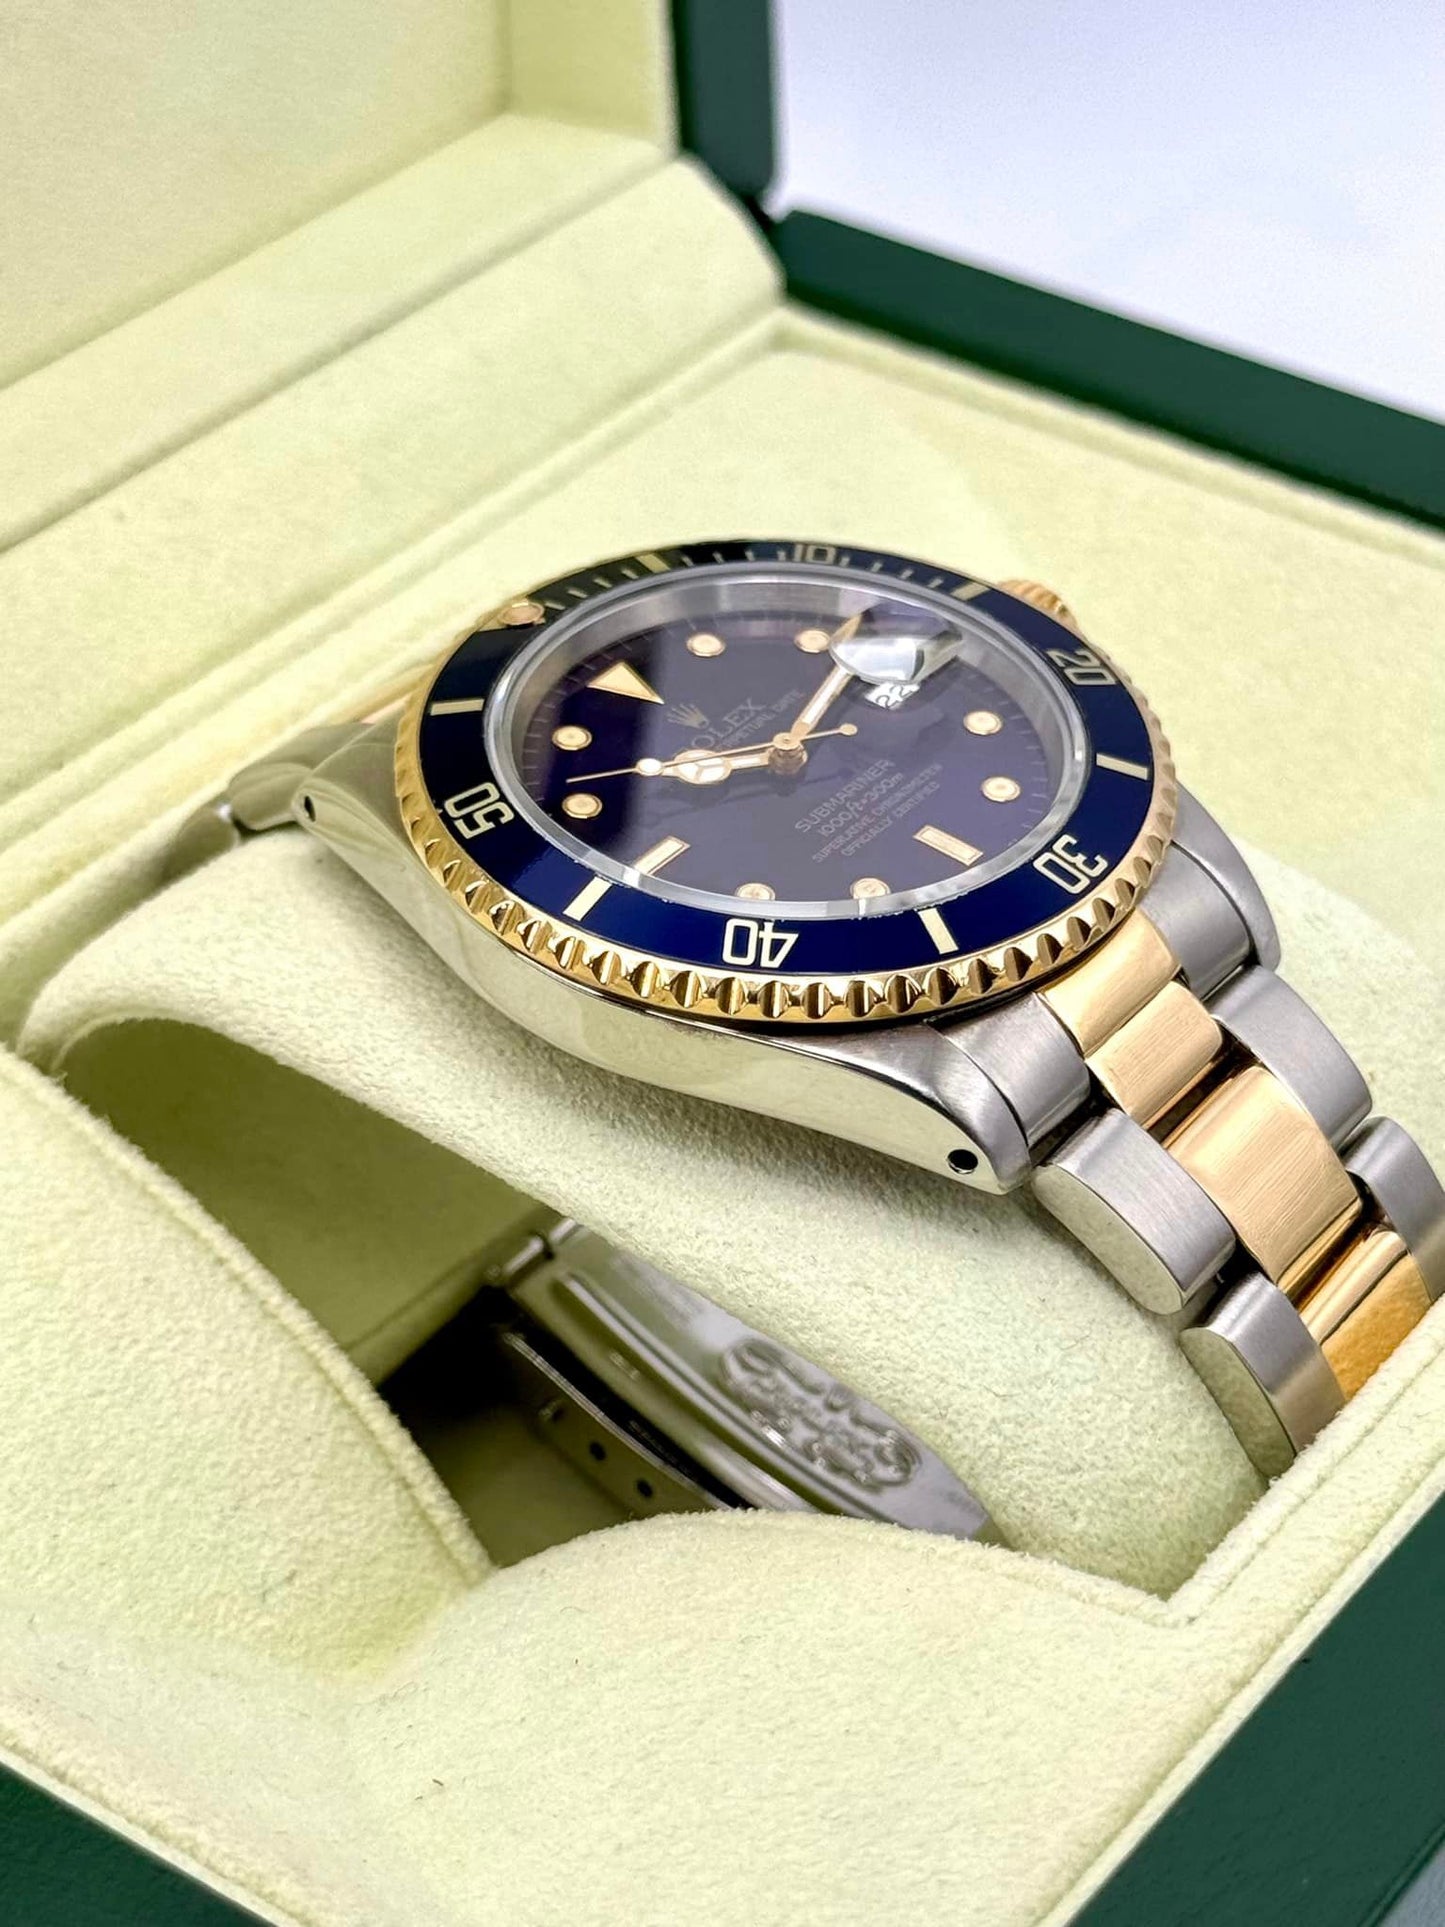 1987 Rolex Submariner 40mm 16803 Two-Tone Blue/Purple Dial - MyWatchLLC